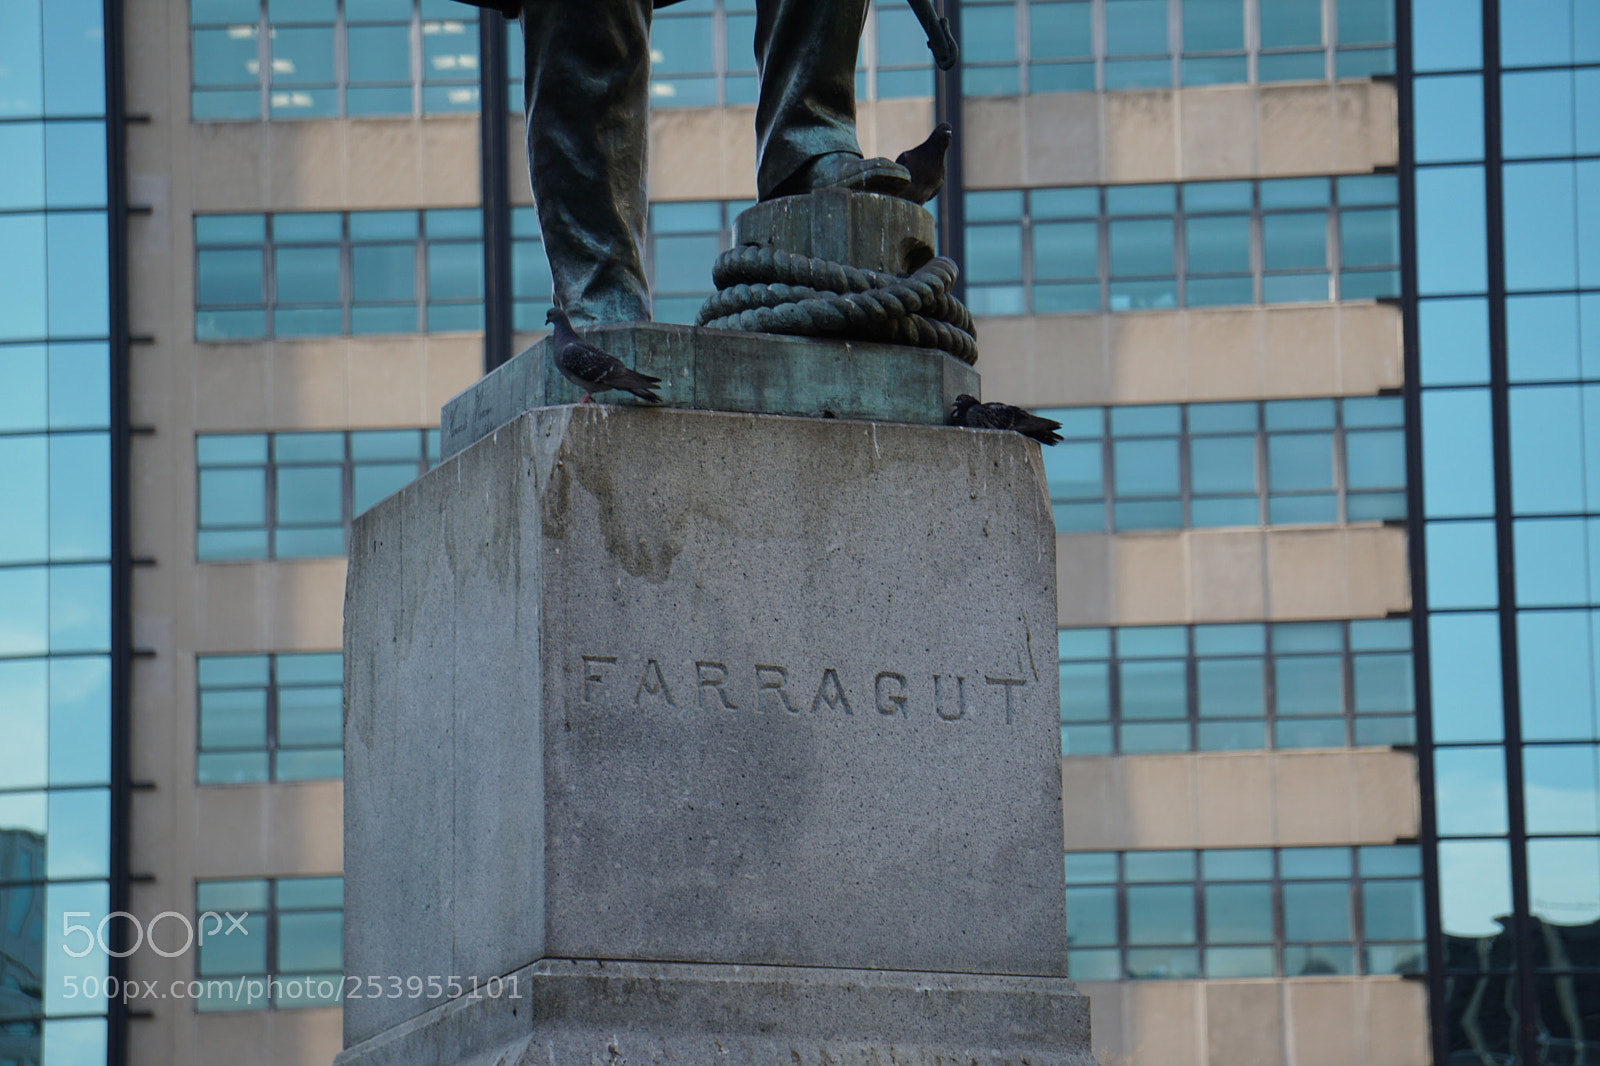 Sony a6000 sample photo. Farragut square statue photography